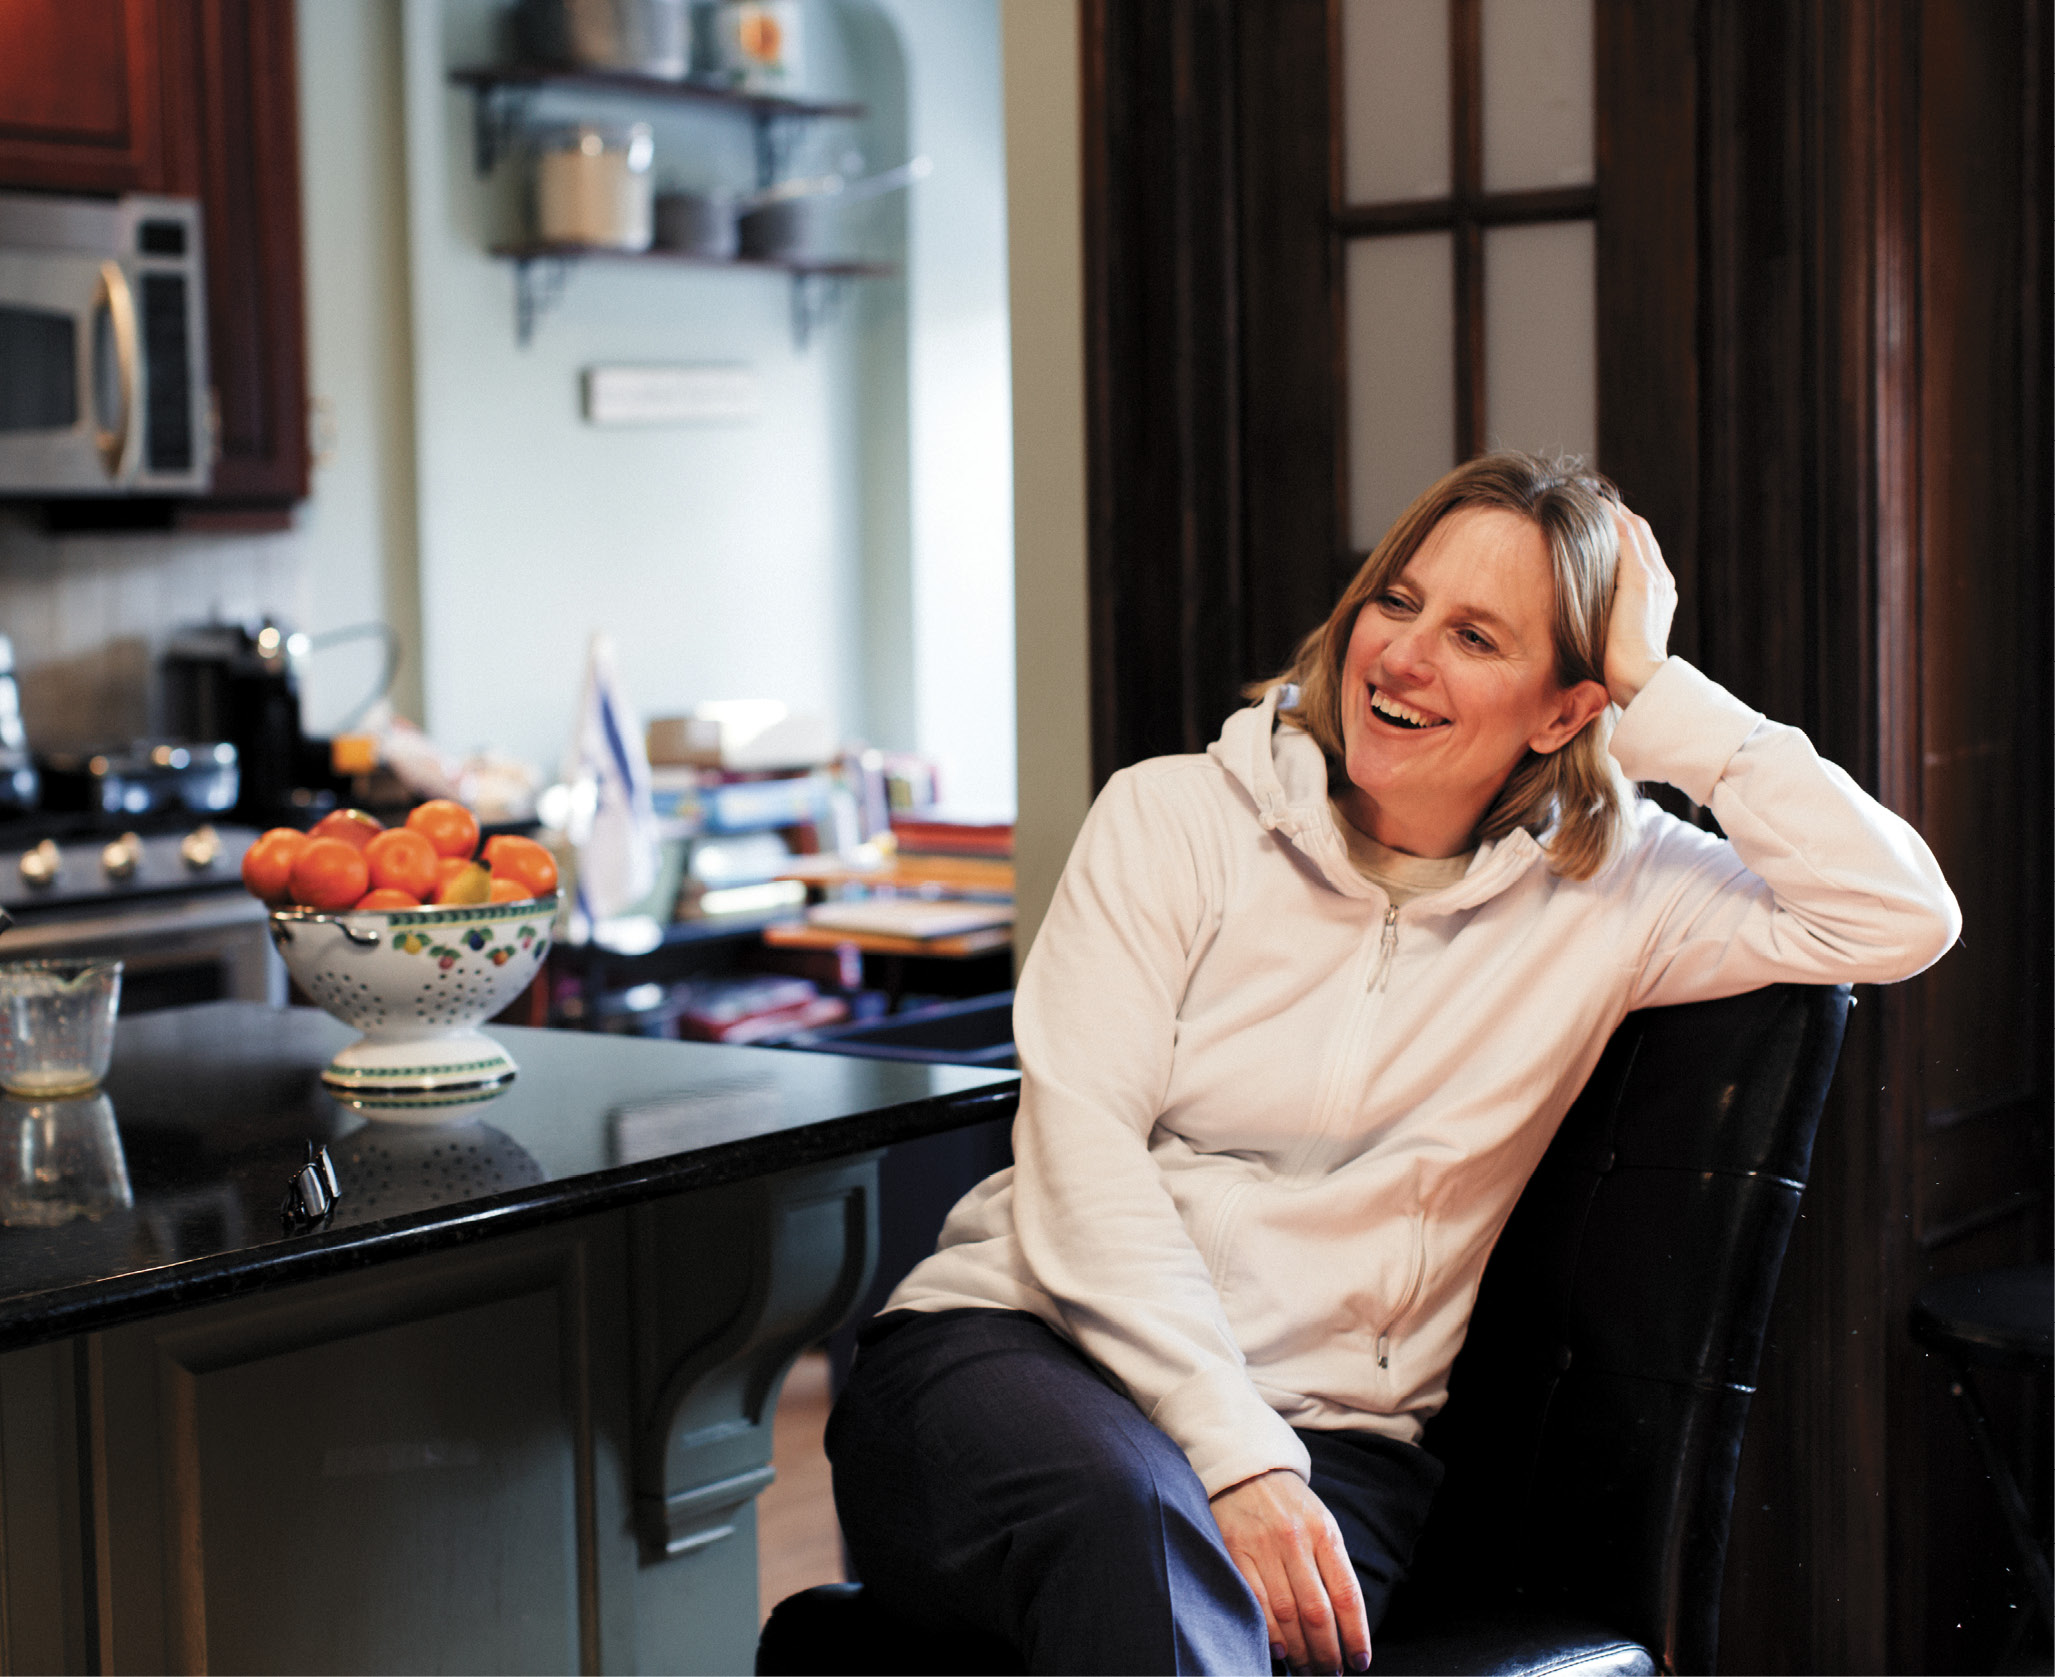 The Queens Borough President, Melinda Katz, is raising her two sons in the same Forest Hills home that she grew up in.